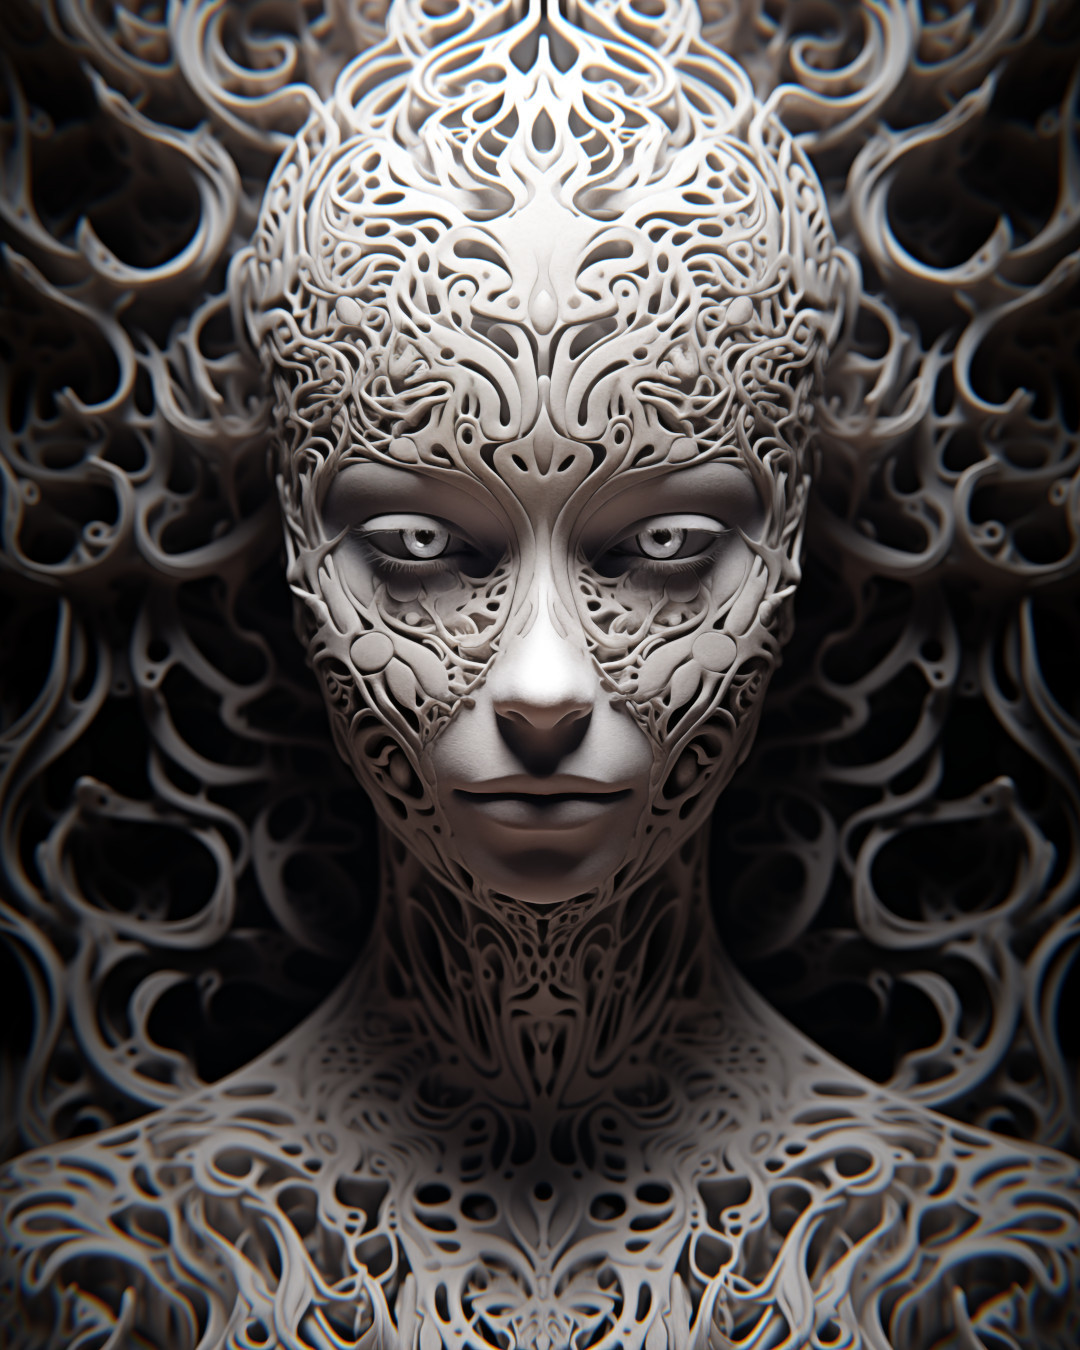 Woman in the style of ornate complexity, dark white and silver